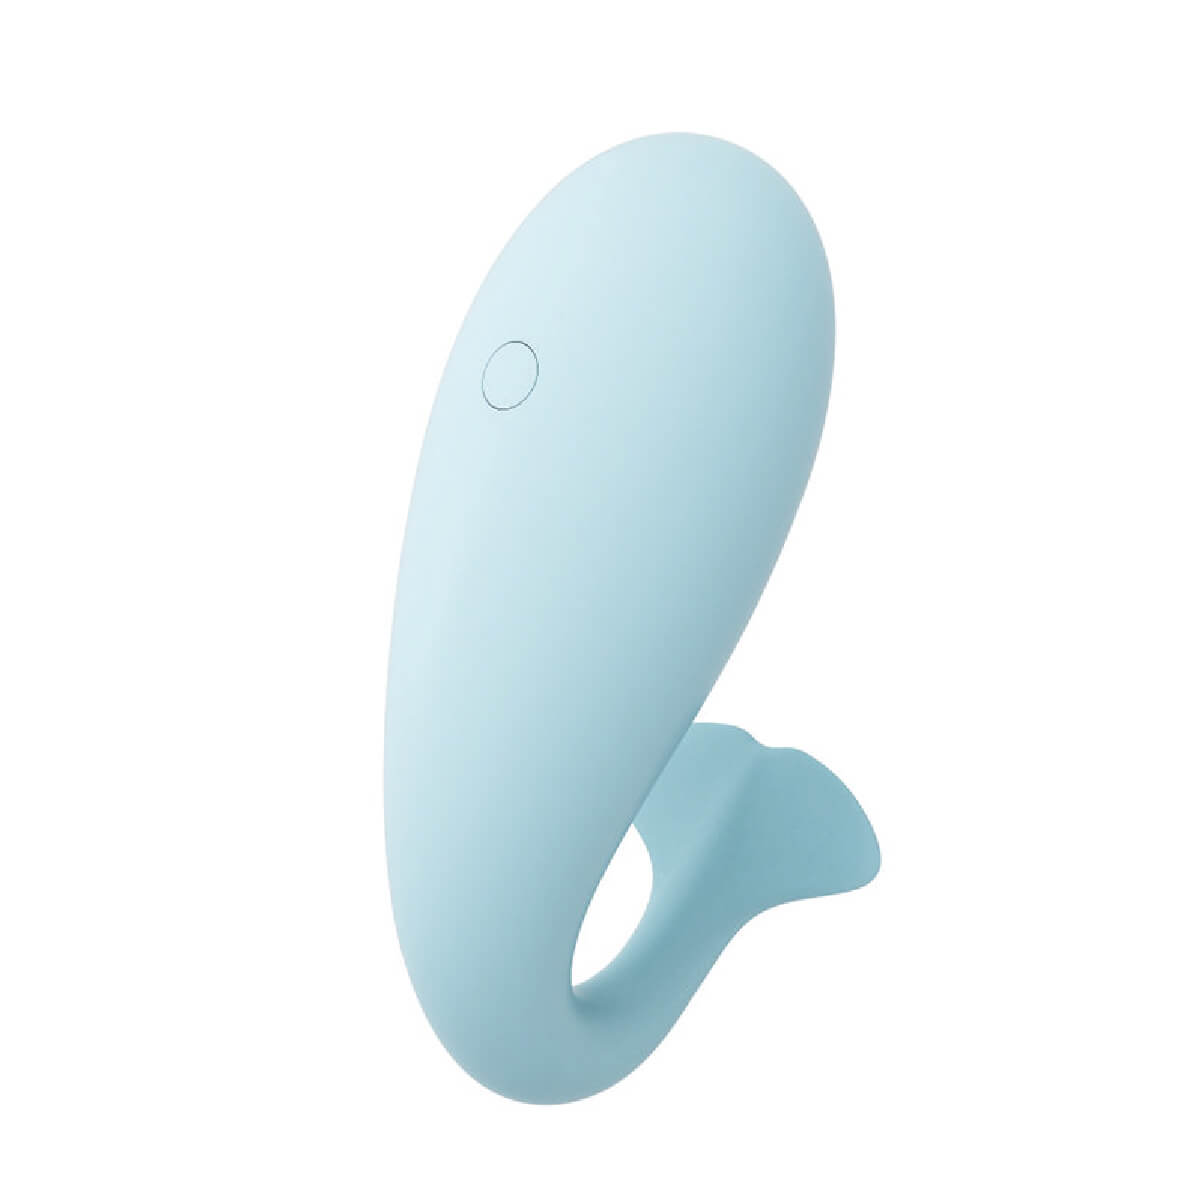 The beautiful design egg vibrator Doctor Whale by Monster Pub - Product image